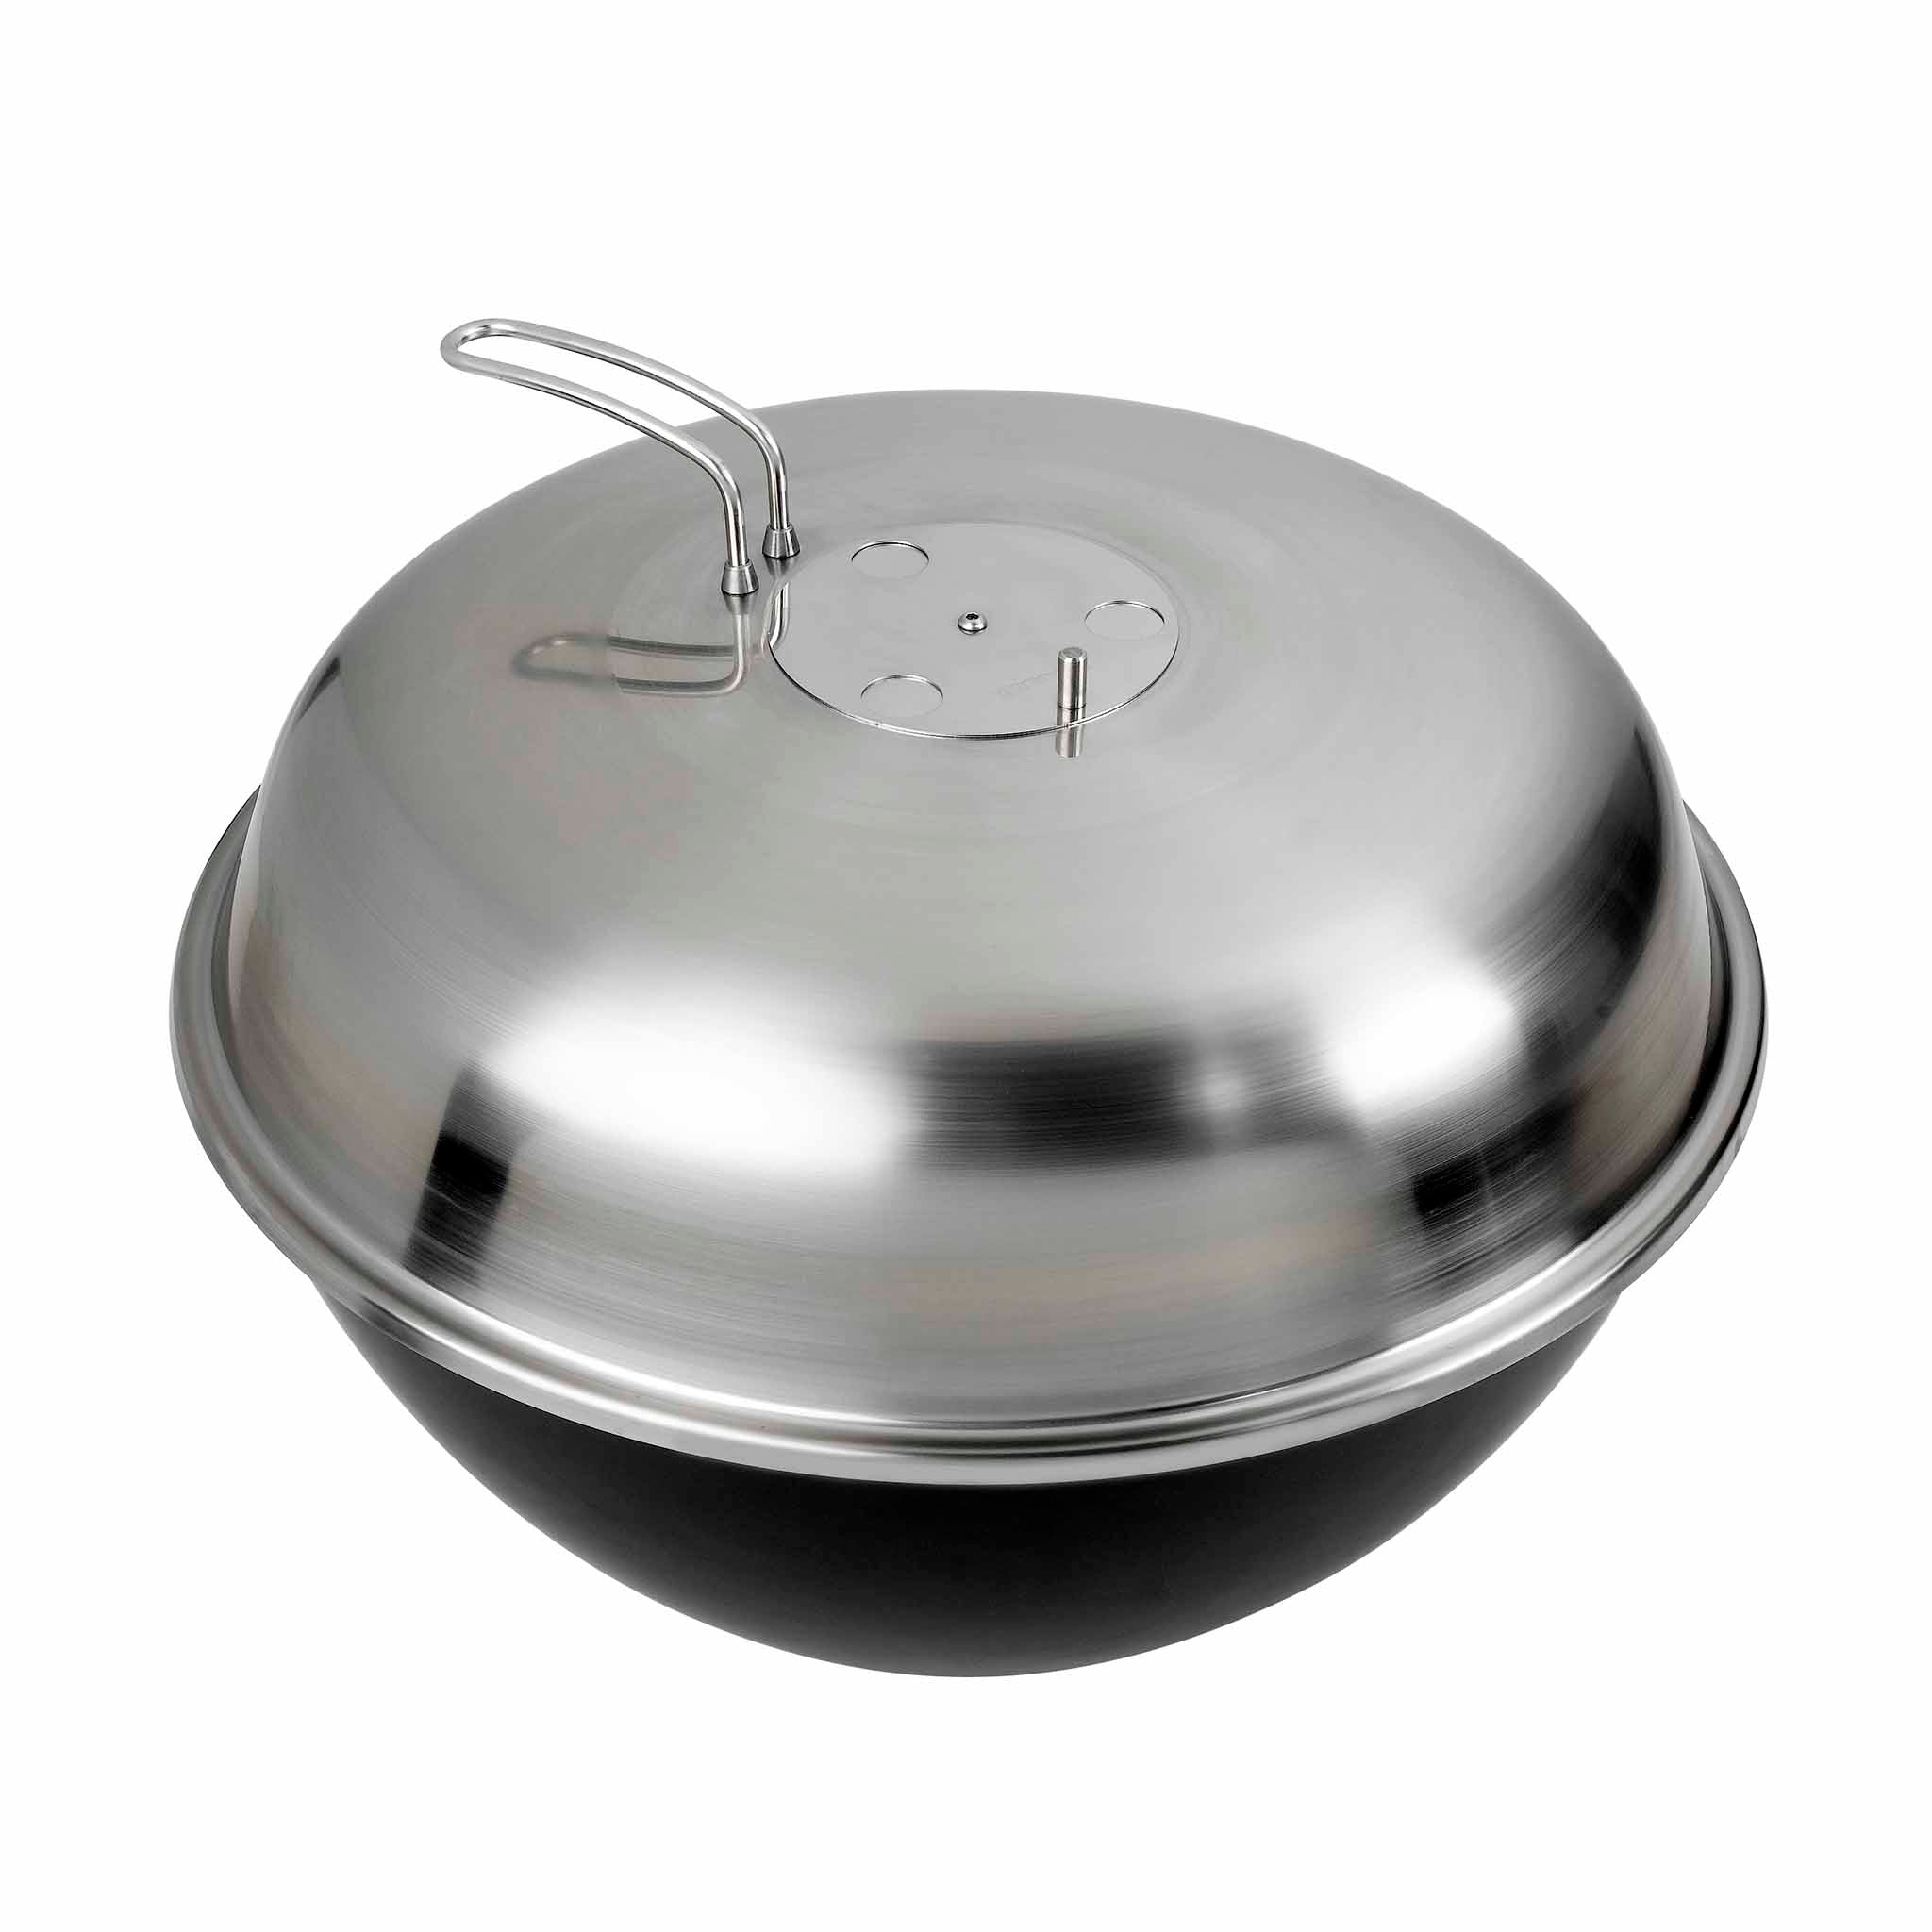 Built-in kettle barbecue